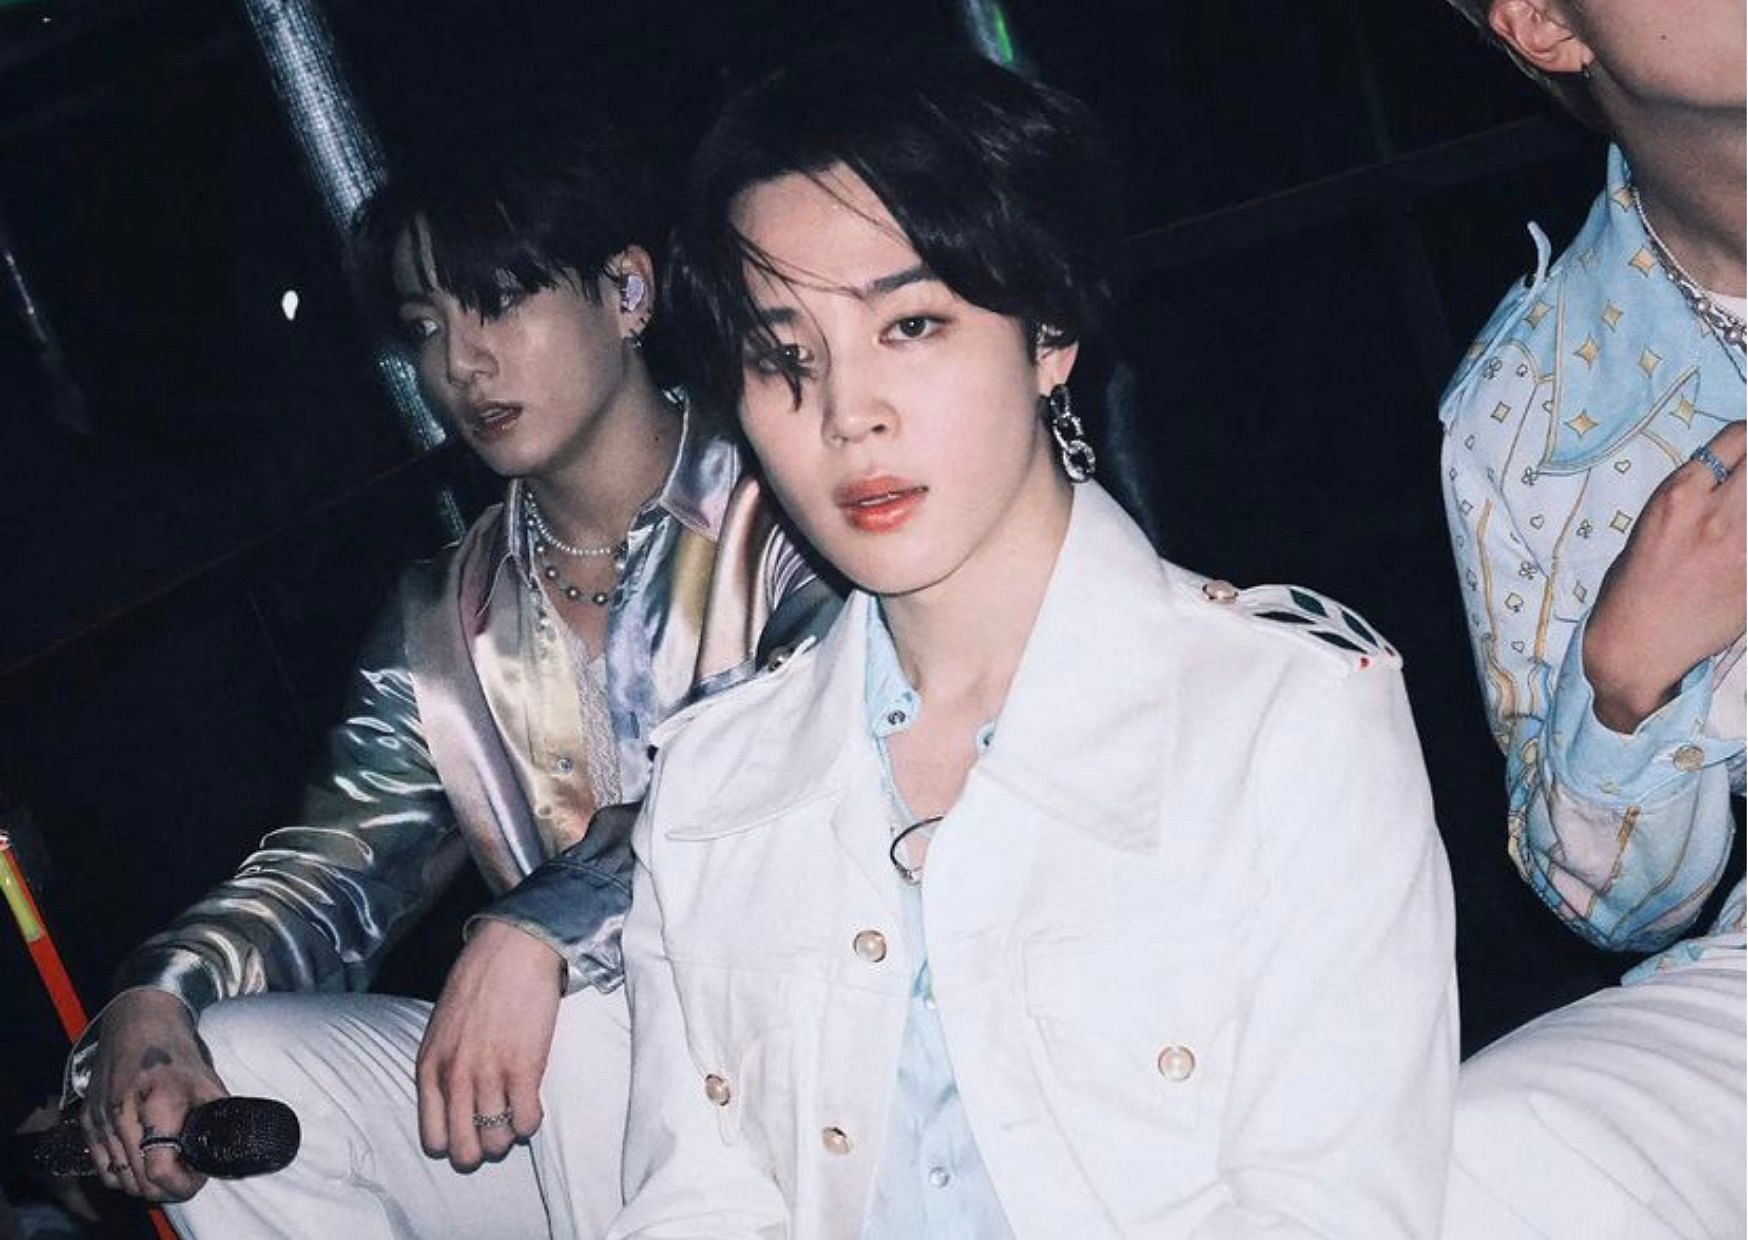 BTS' Jimin has fun on stage at the Seoul concert and accidentally ...